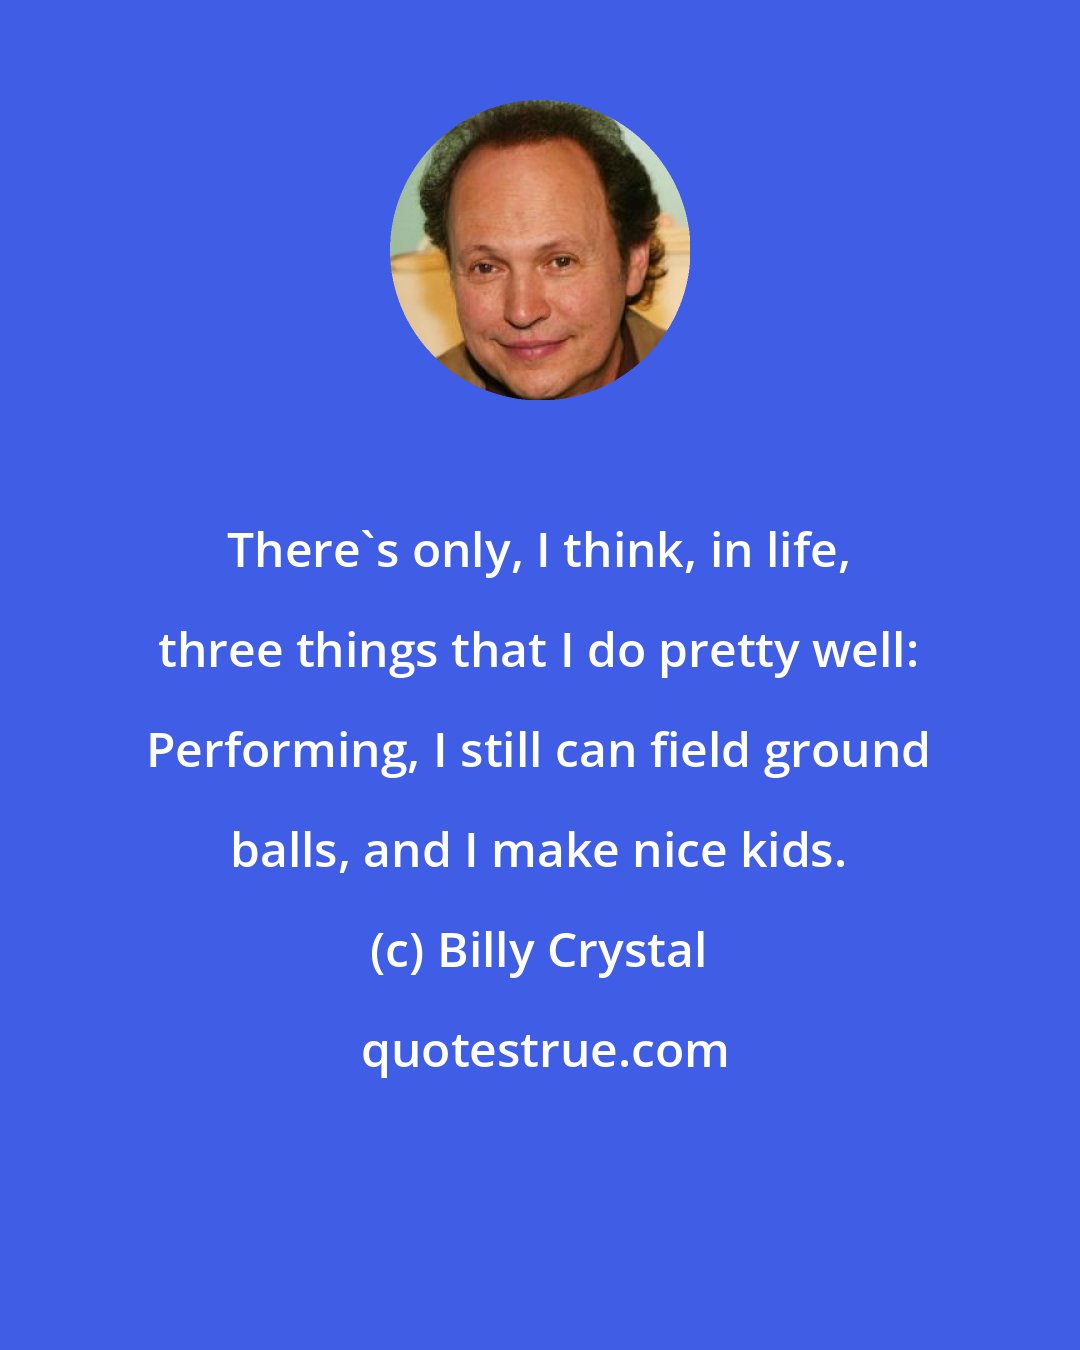 Billy Crystal: There's only, I think, in life, three things that I do pretty well: Performing, I still can field ground balls, and I make nice kids.